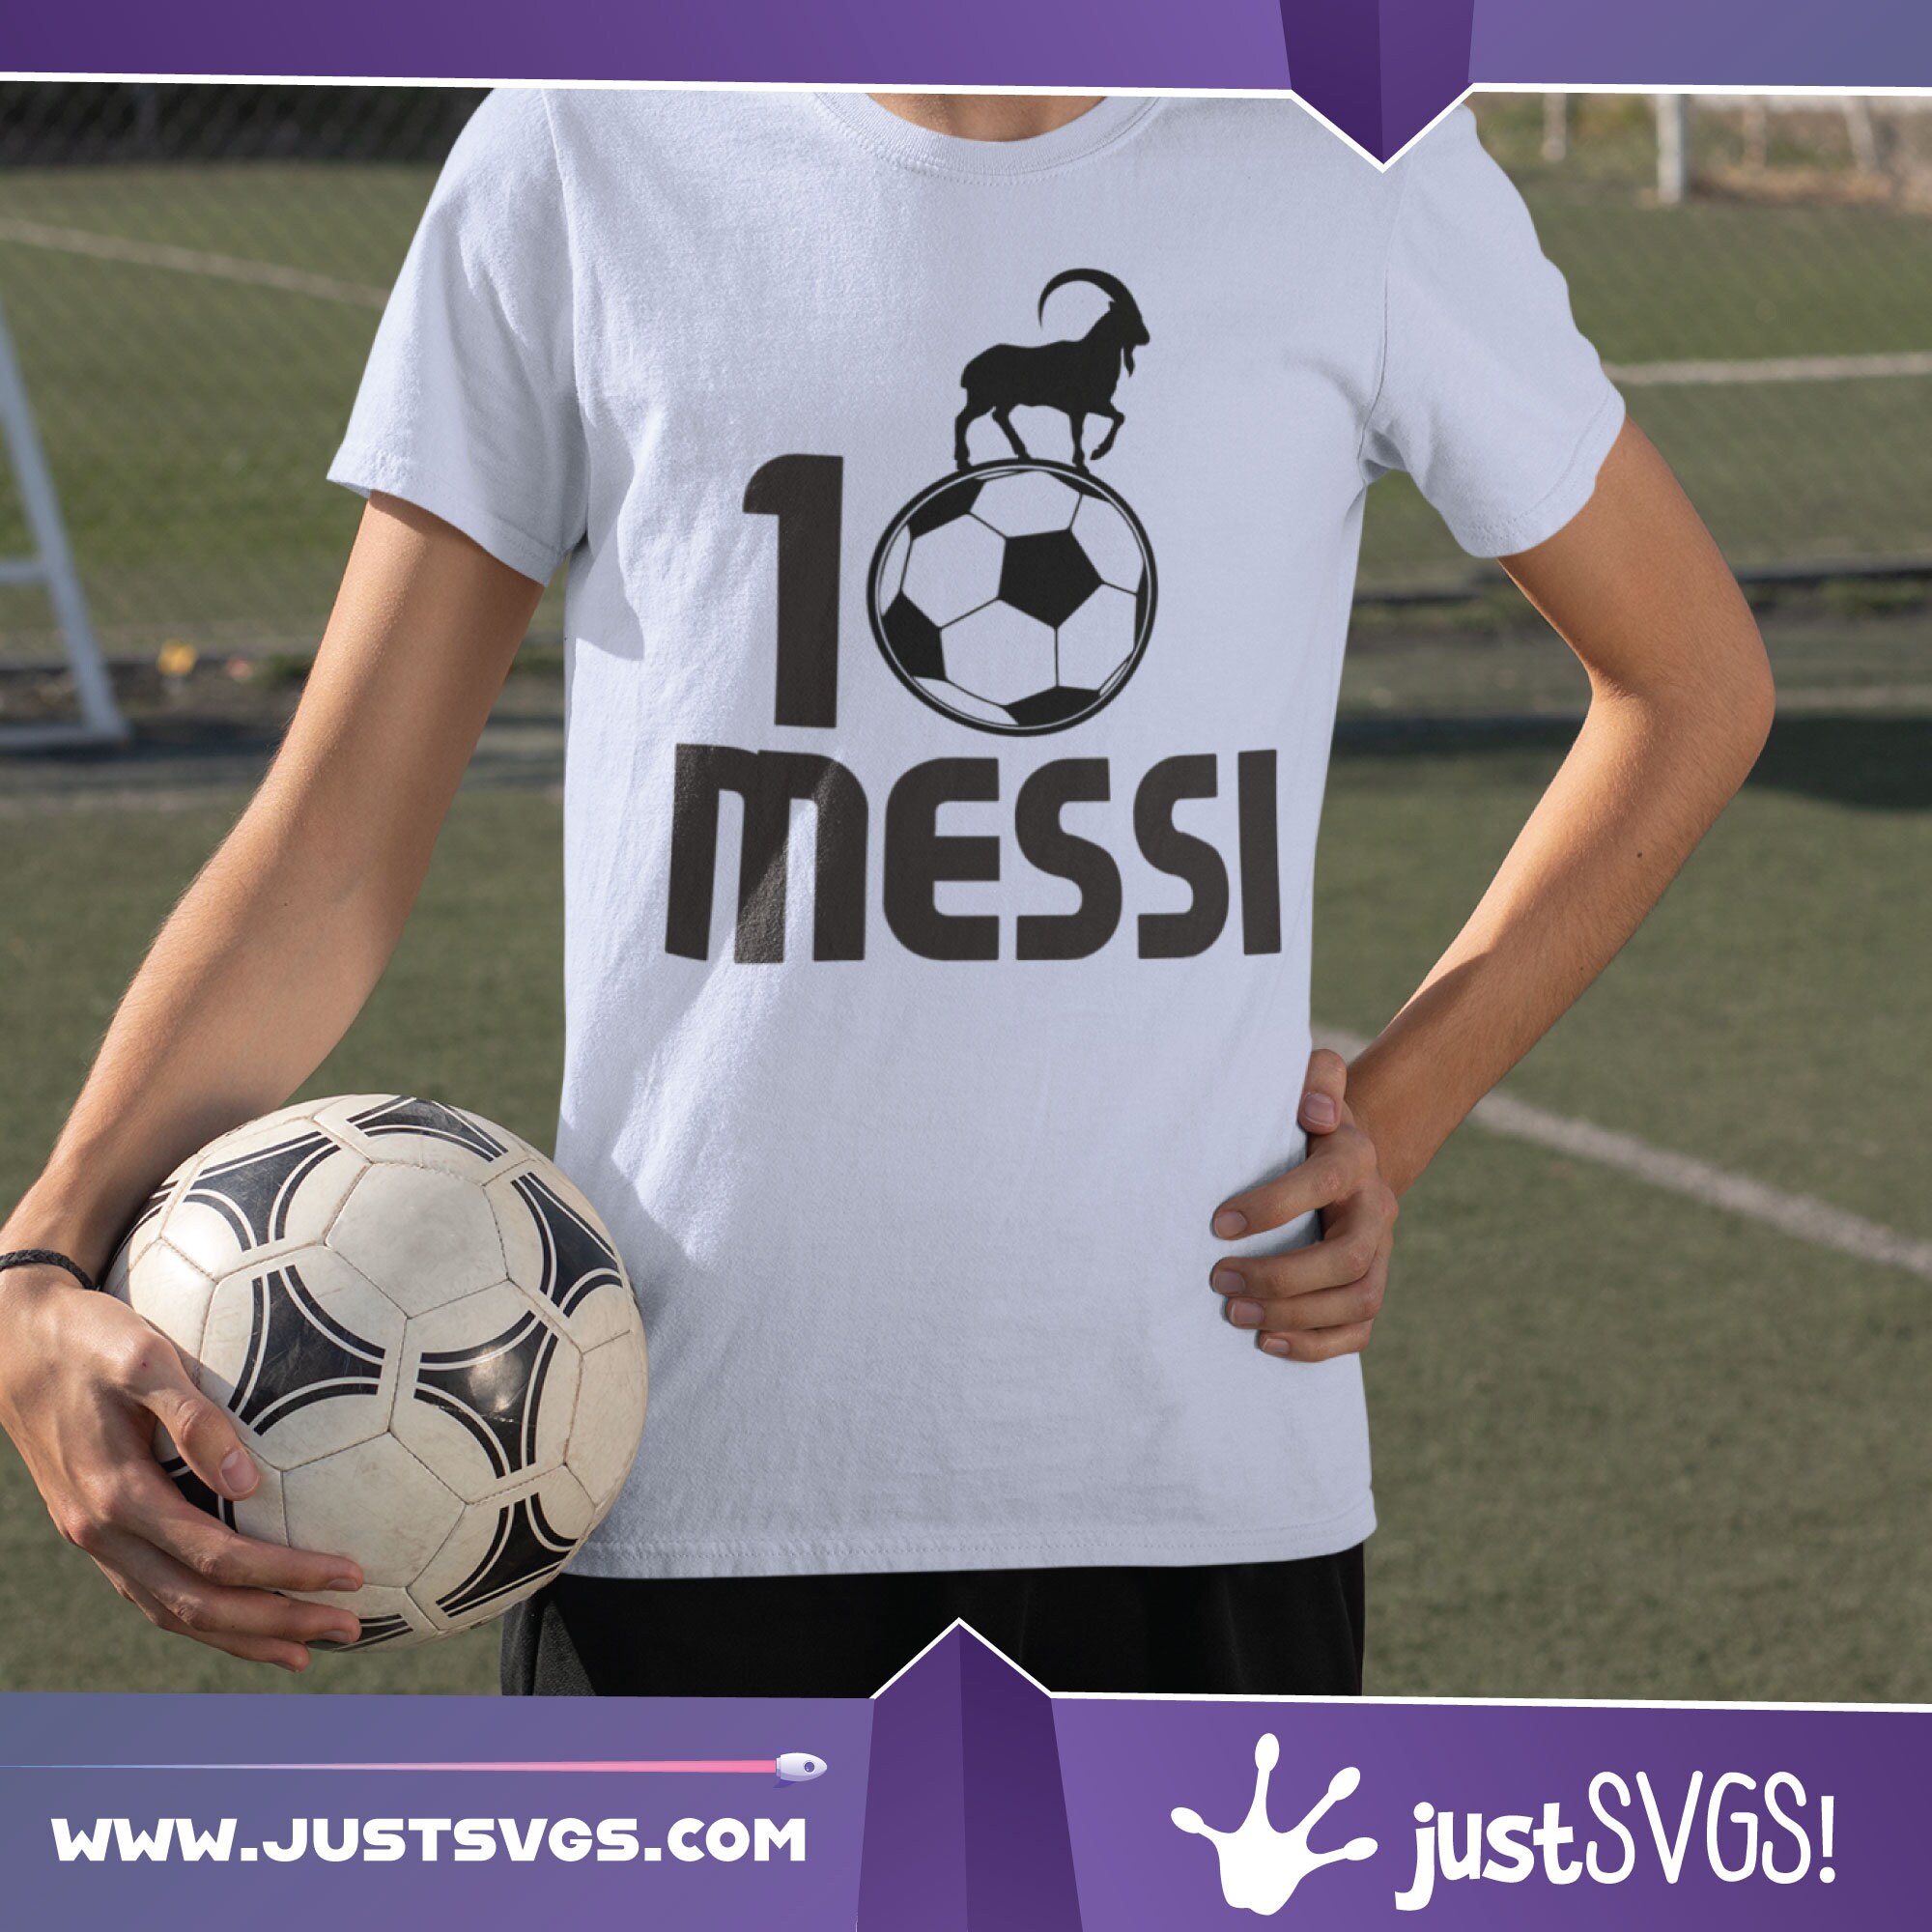 Duck Lv made the Lionel Messi 2022 T-shirt – T-Shirts  FOXTEES – Premium  Fashion T-Shirts, Hoodie – Foxteess Fashion LLC – Store   Collection Home Page Sports & Pop-culture Tee